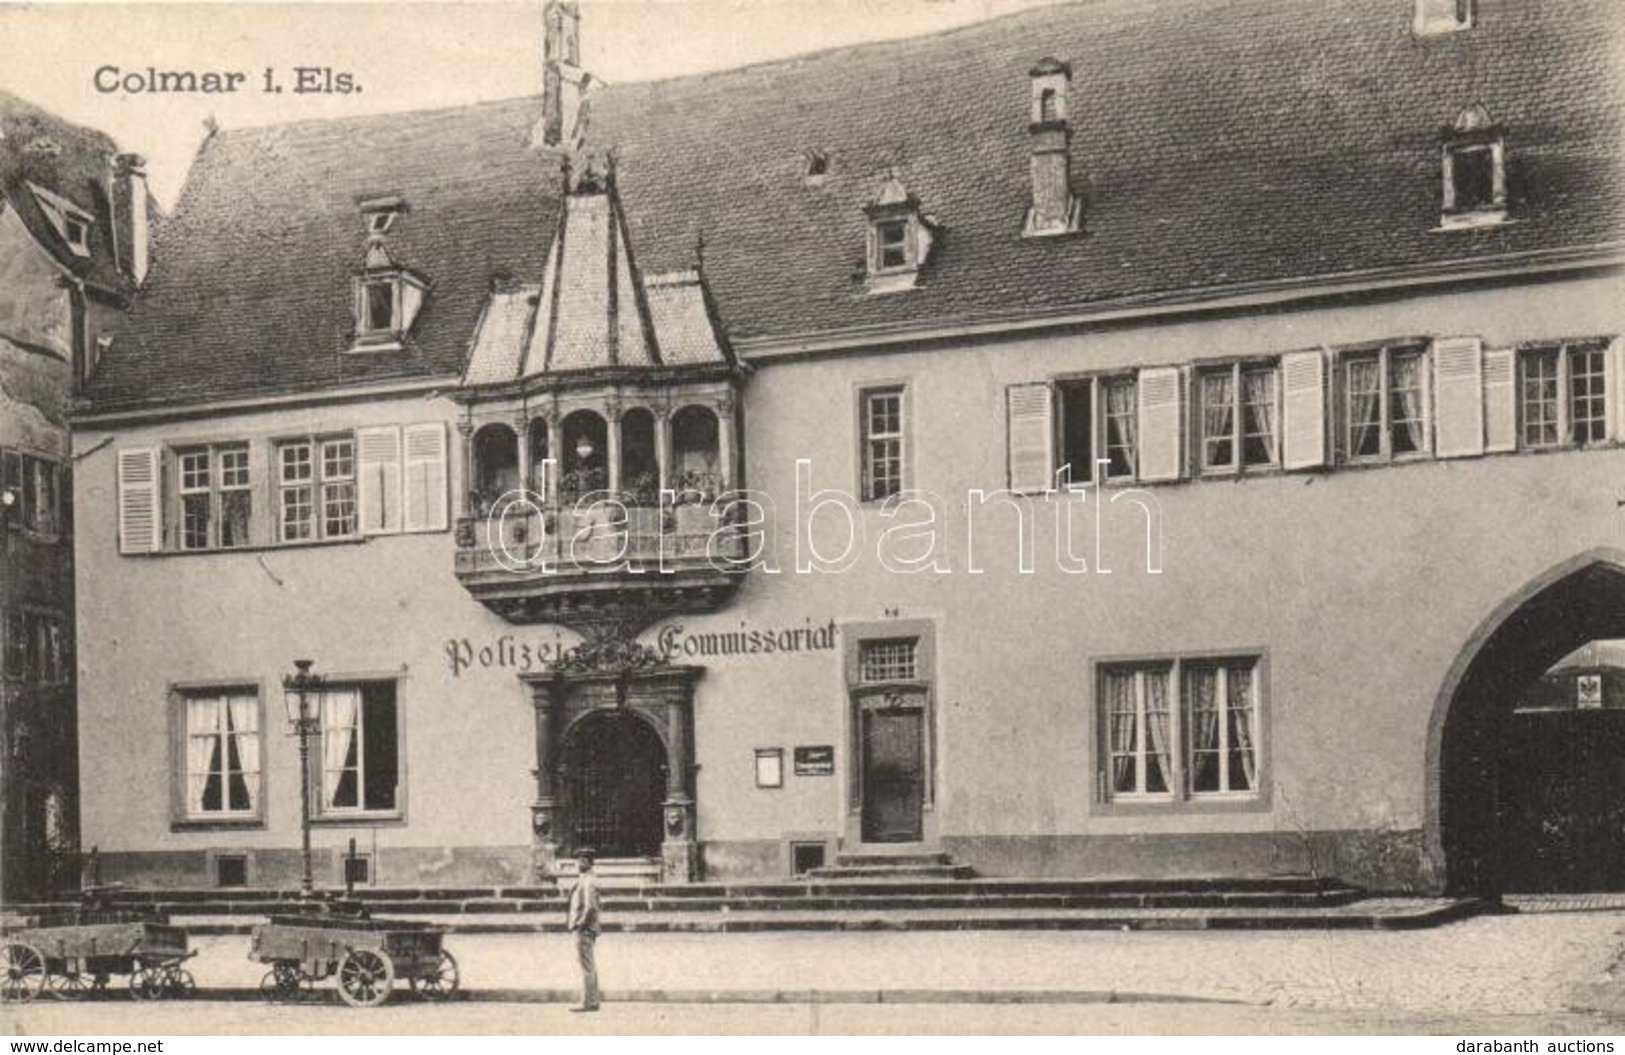 ** T1 Colmar, Polizei / Commissariat / Police Station - Unclassified